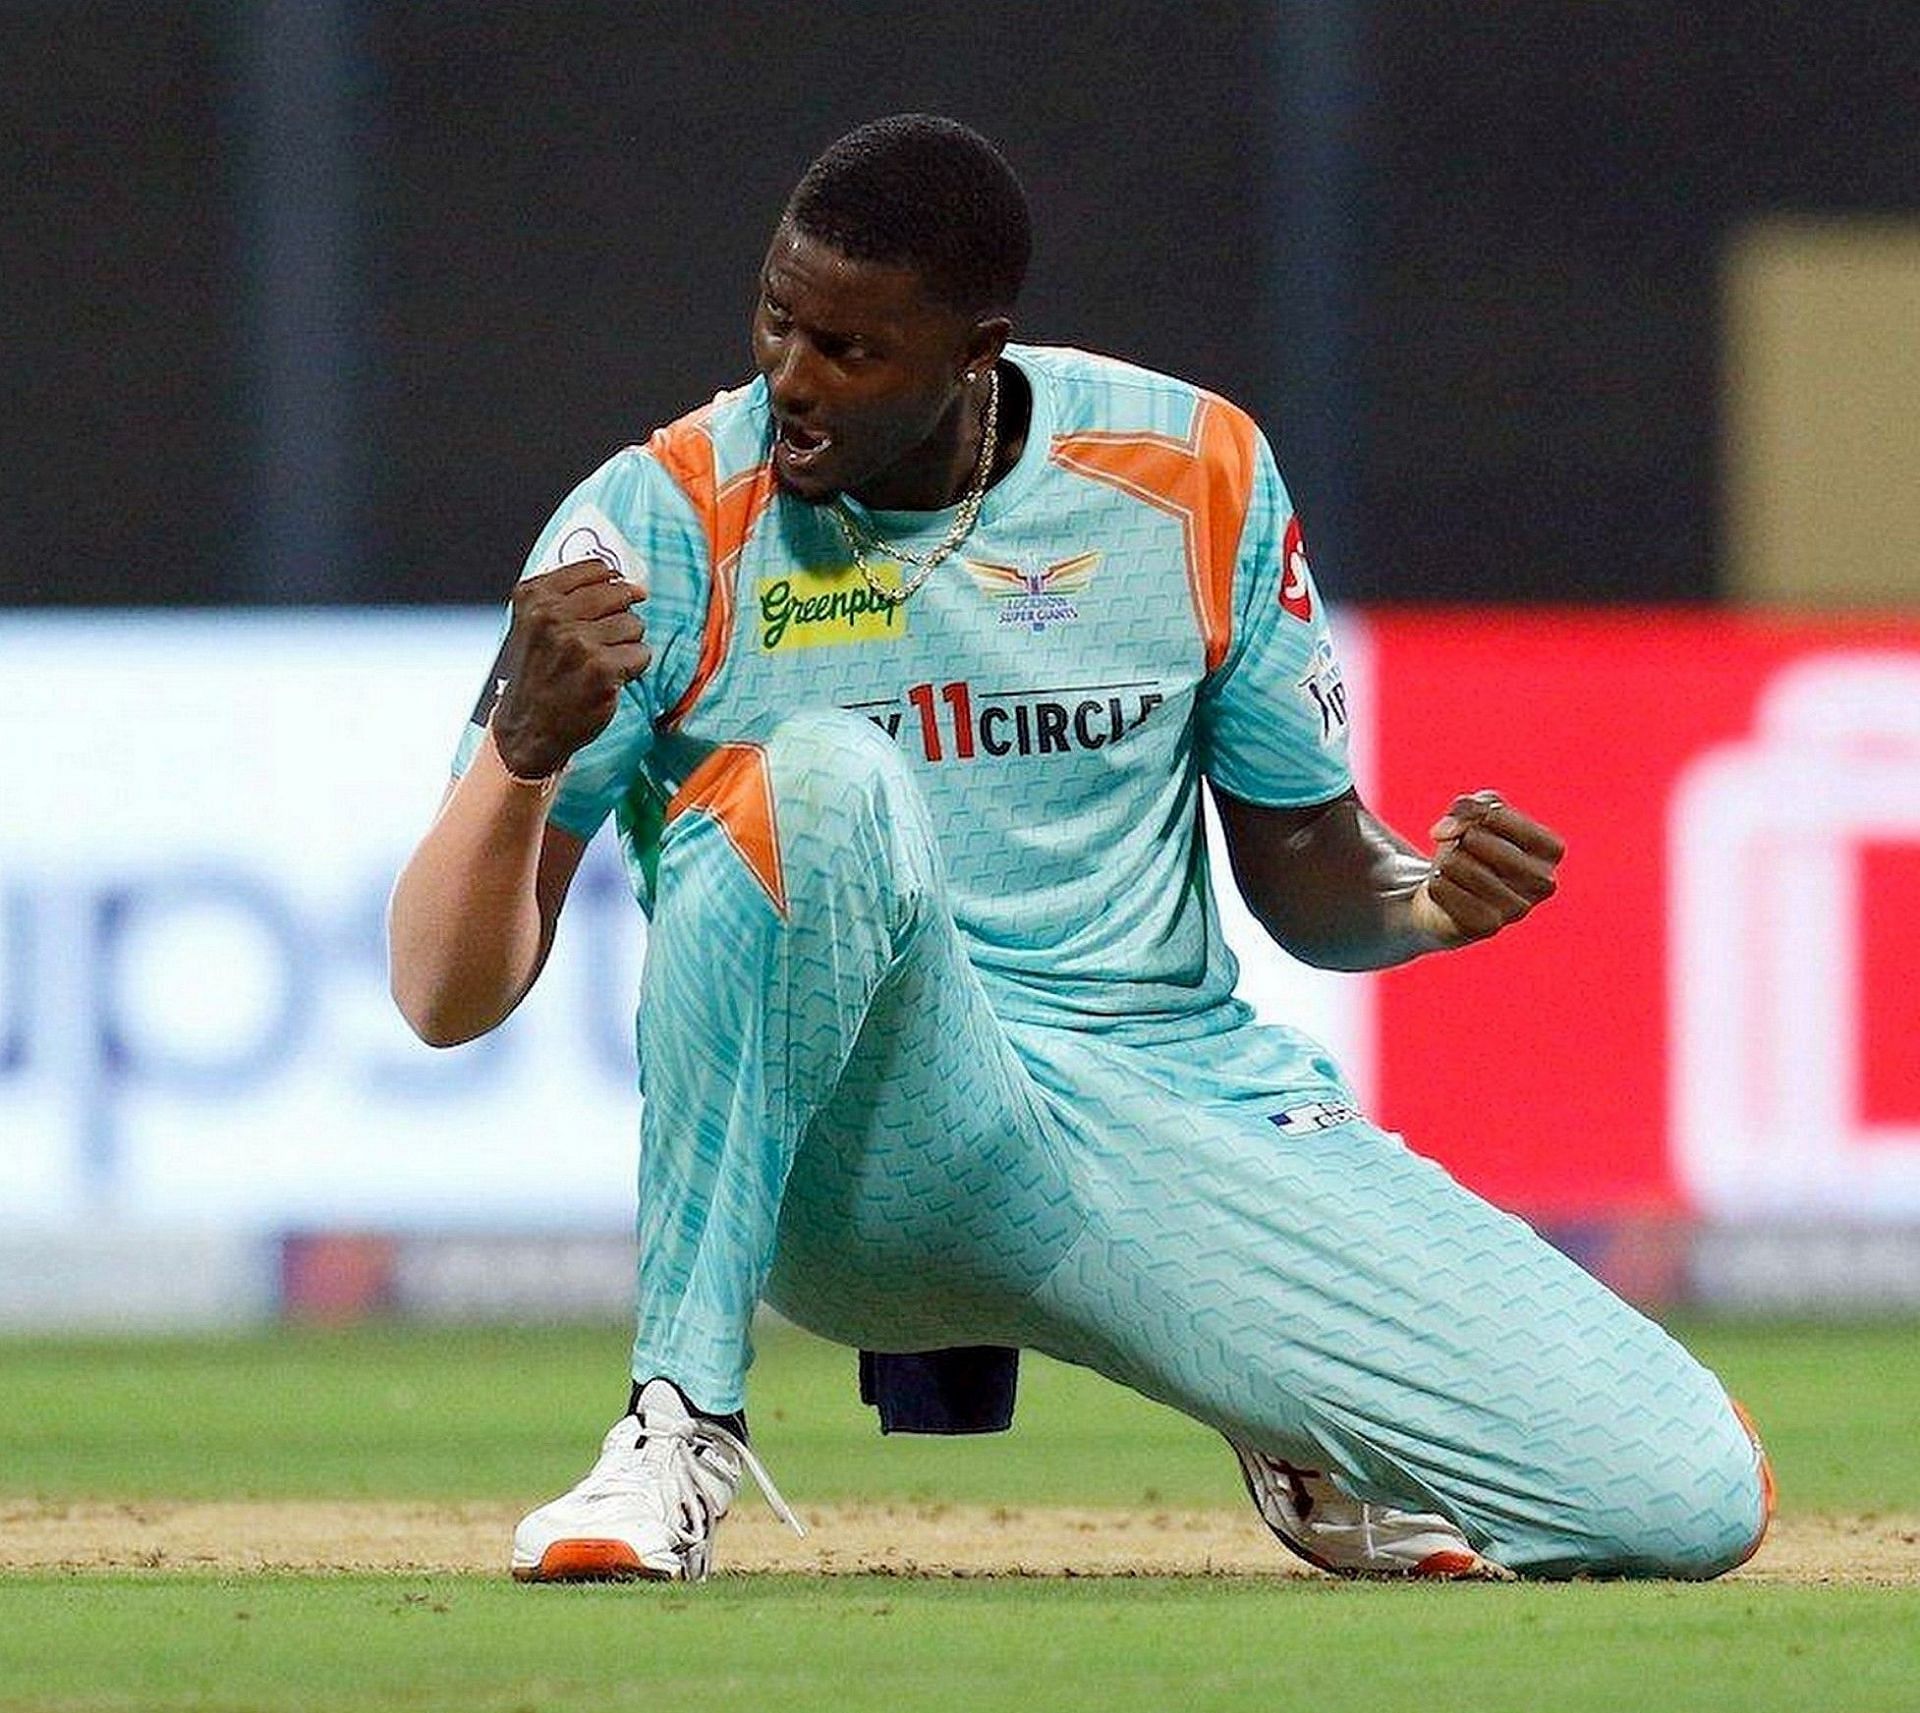 Jason Holder has scored 58 runs at a strike rate of 131.82 and scalped 14 wickets for LSG this season. Image: IPL/BCCI